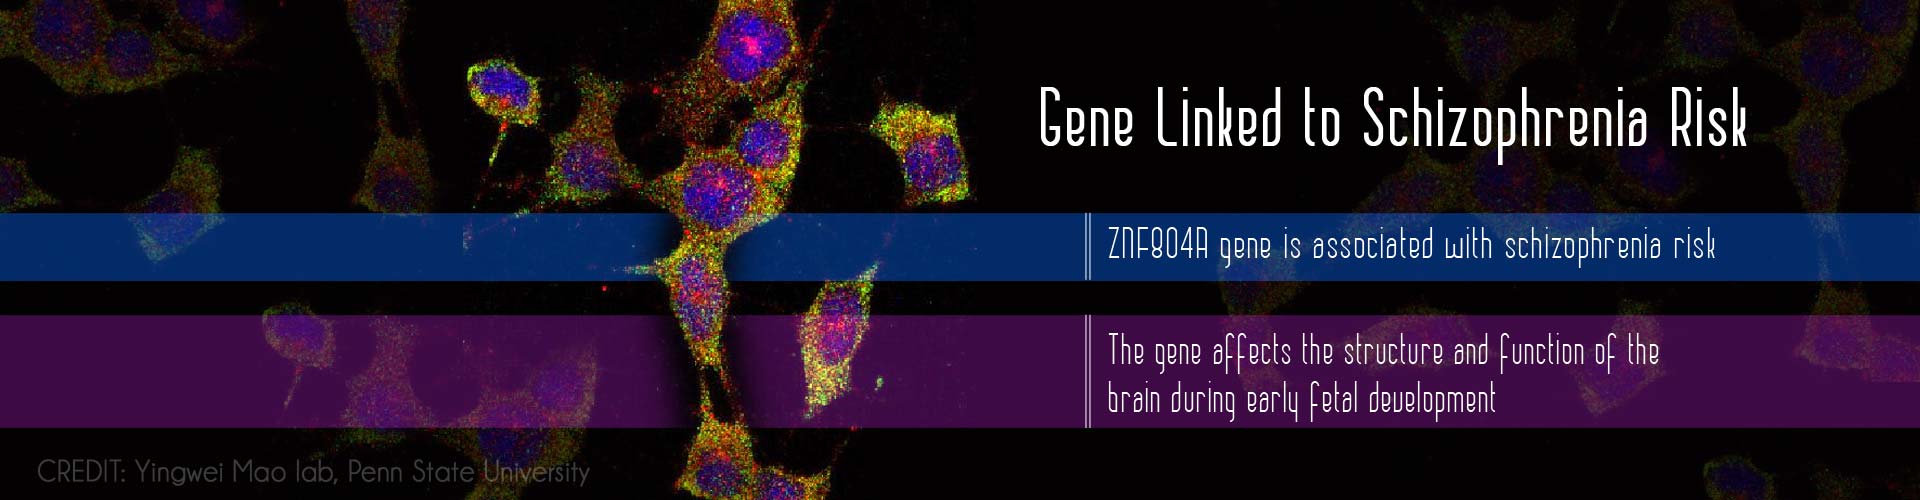 Gene linked to schizophrenia risk
- ZNF804A gene is associated with schizophrenia risk
- The gene affects the structure and function of the brain during early fetal development